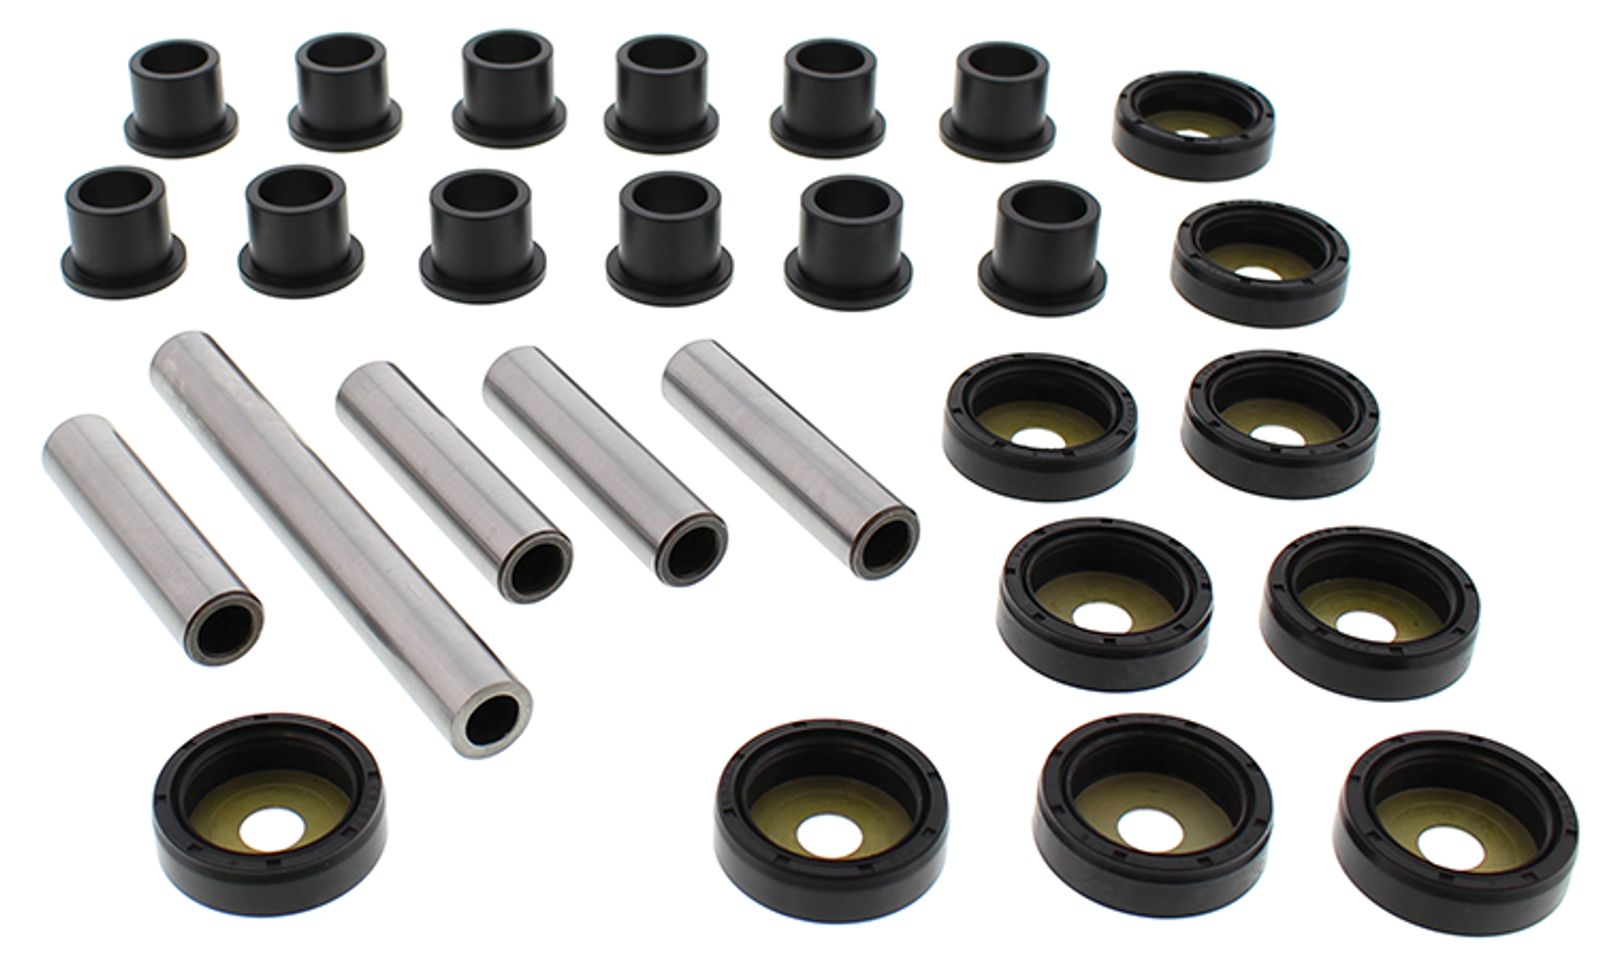 Wrp Rear Ind. Suspension Kits - WRP501158 image